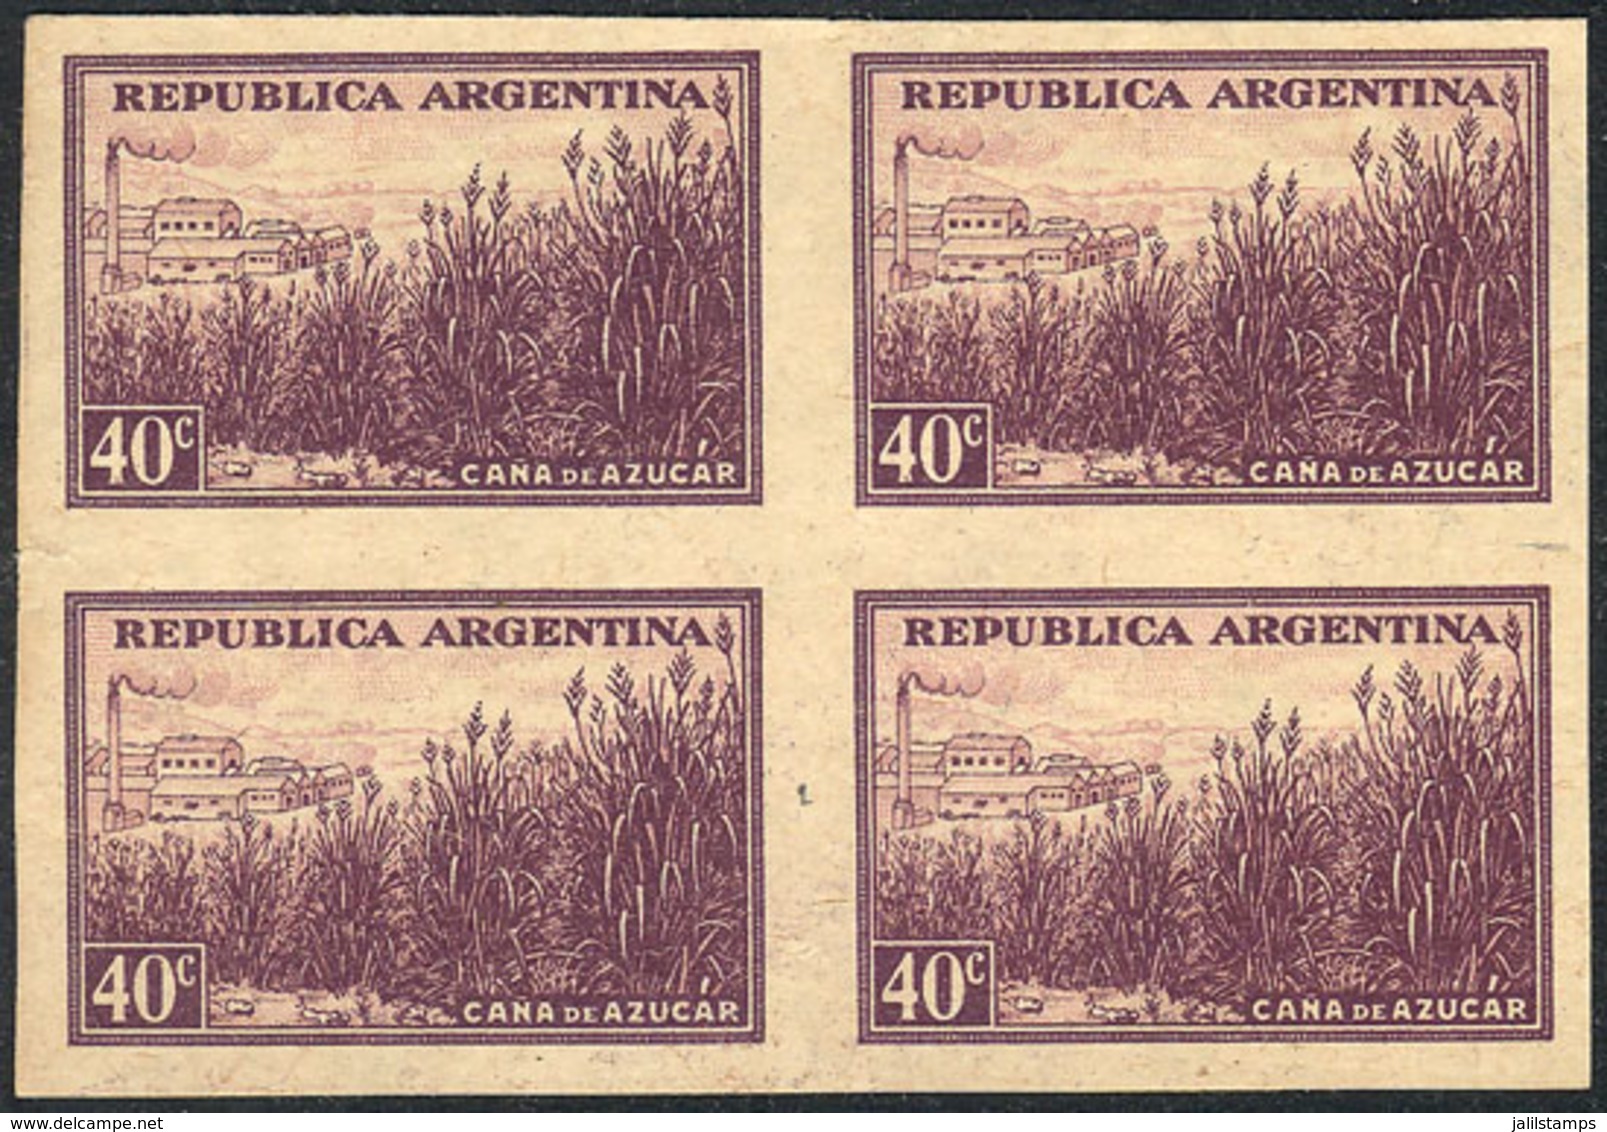 ARGENTINA: GJ.758, 1935/52 40c. Sugar Cane, PROOF In The Adopted Color, Printed On Special Paper For Specimens, Excellen - Usados